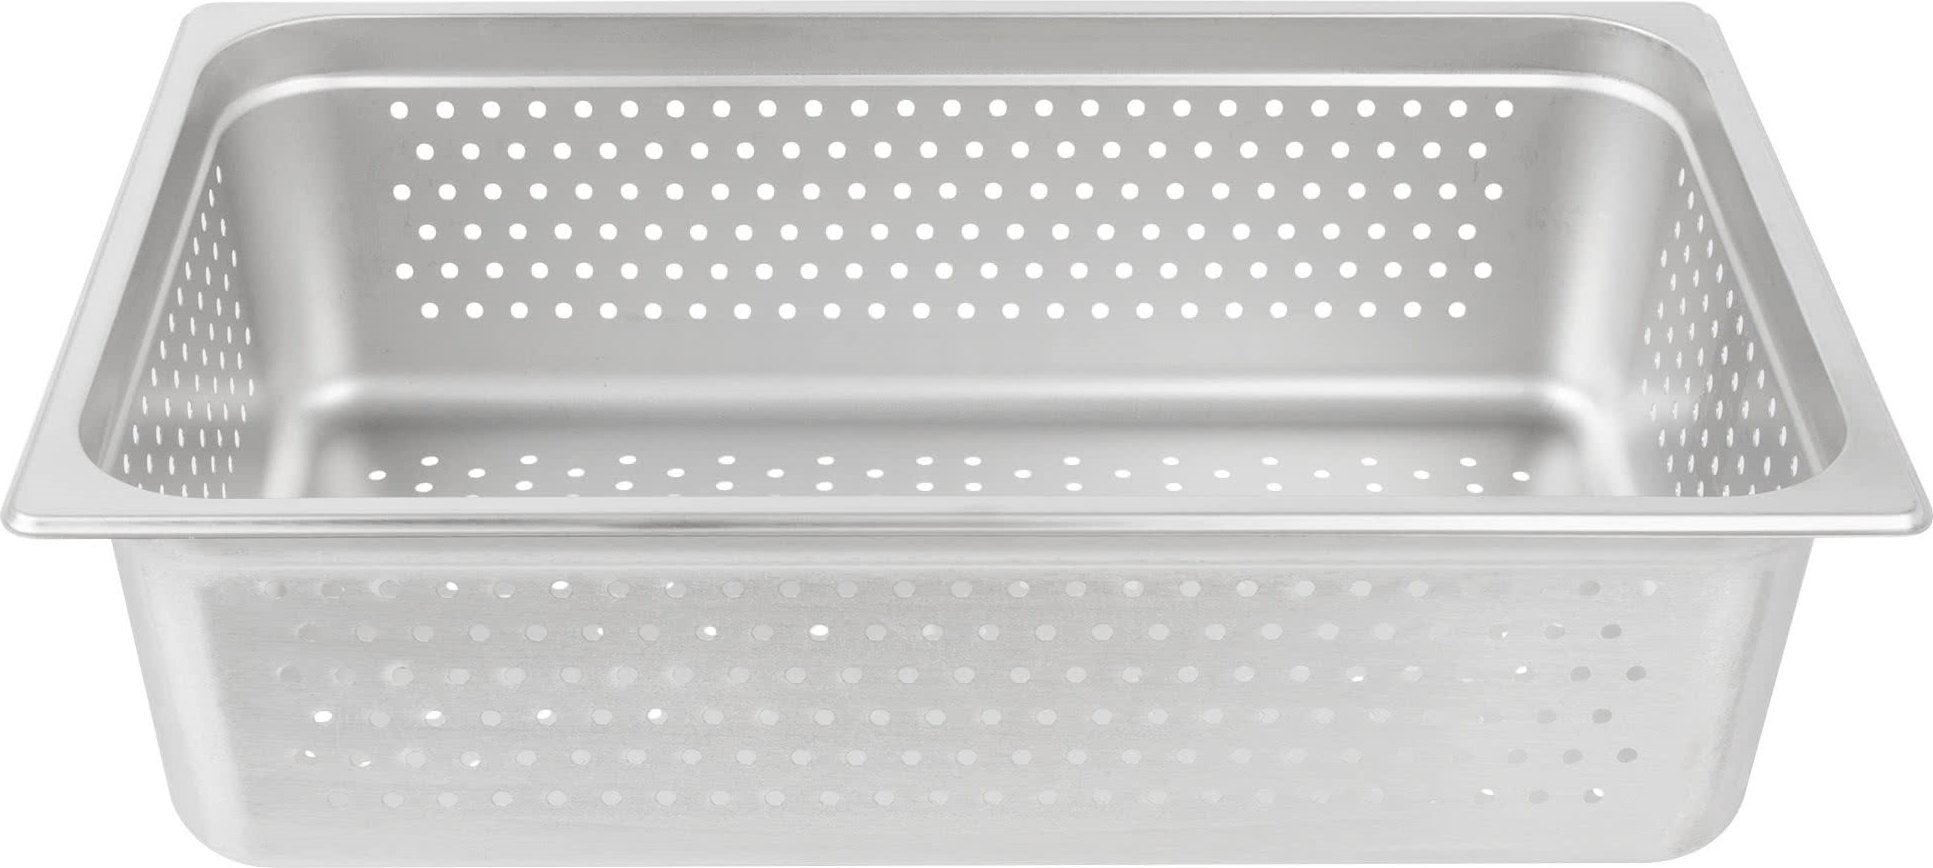 Omcan - 6" Deep Full Size Perforated Steam Table Pan, 5/cs - 85196